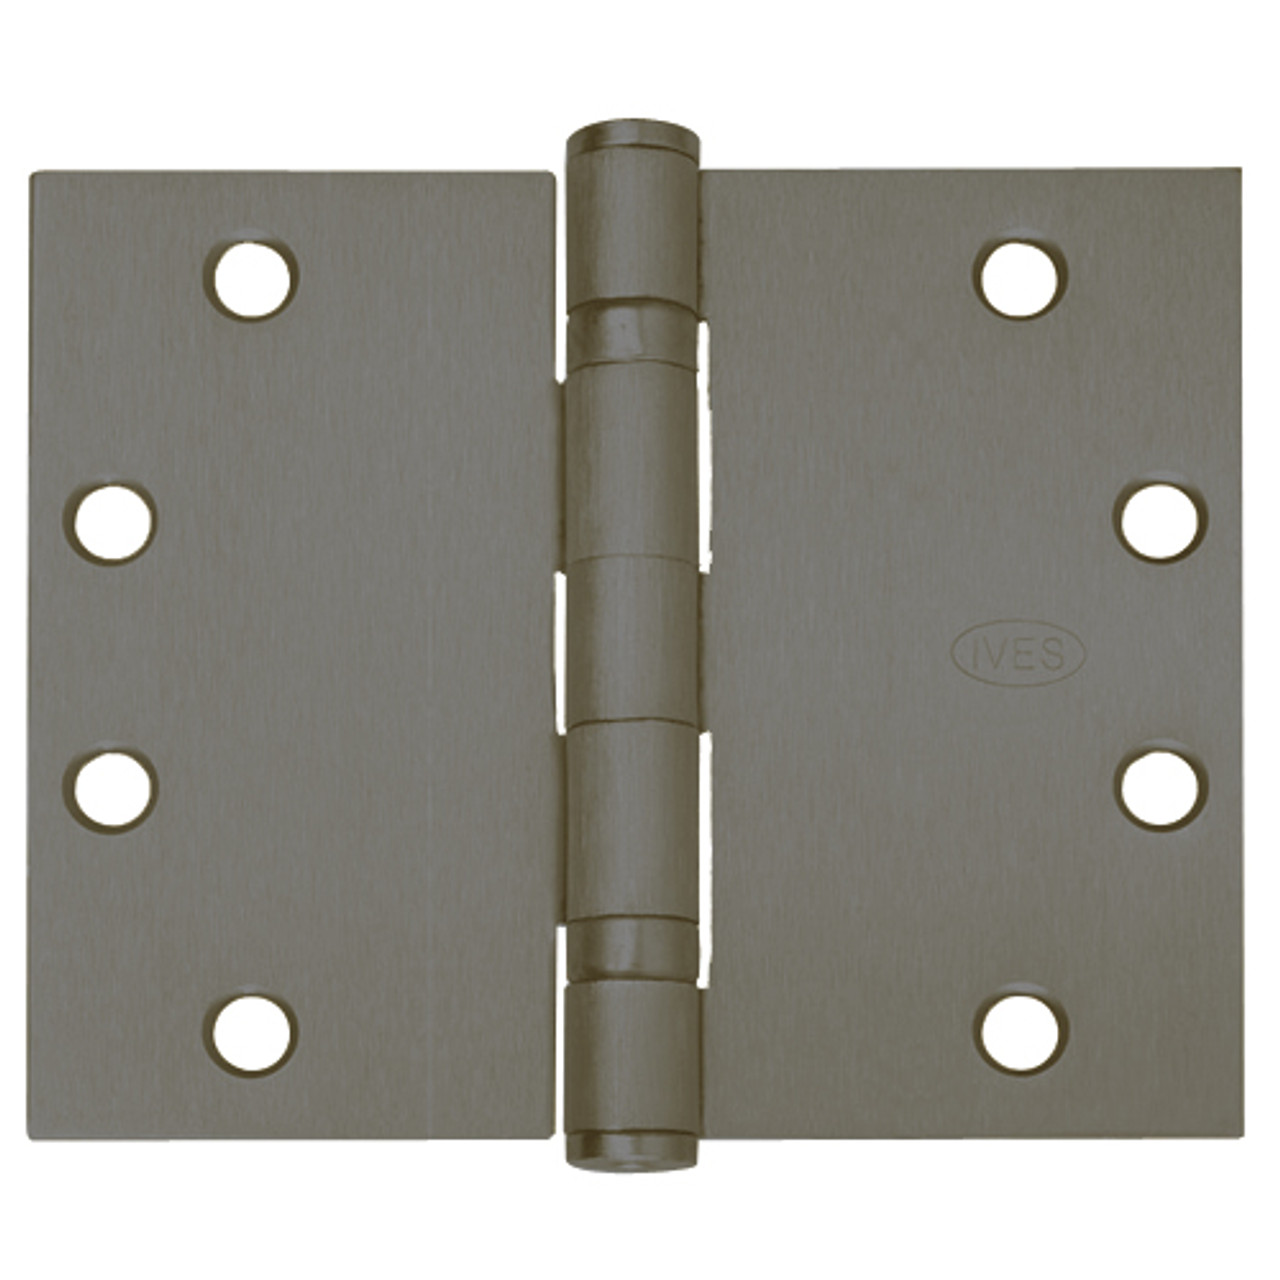 5BB1WT-4-5x6-641 IVES 5 Knuckle Ball Bearing Full Mortise Wide Throw Hinge in Oxidized Satin Bronze